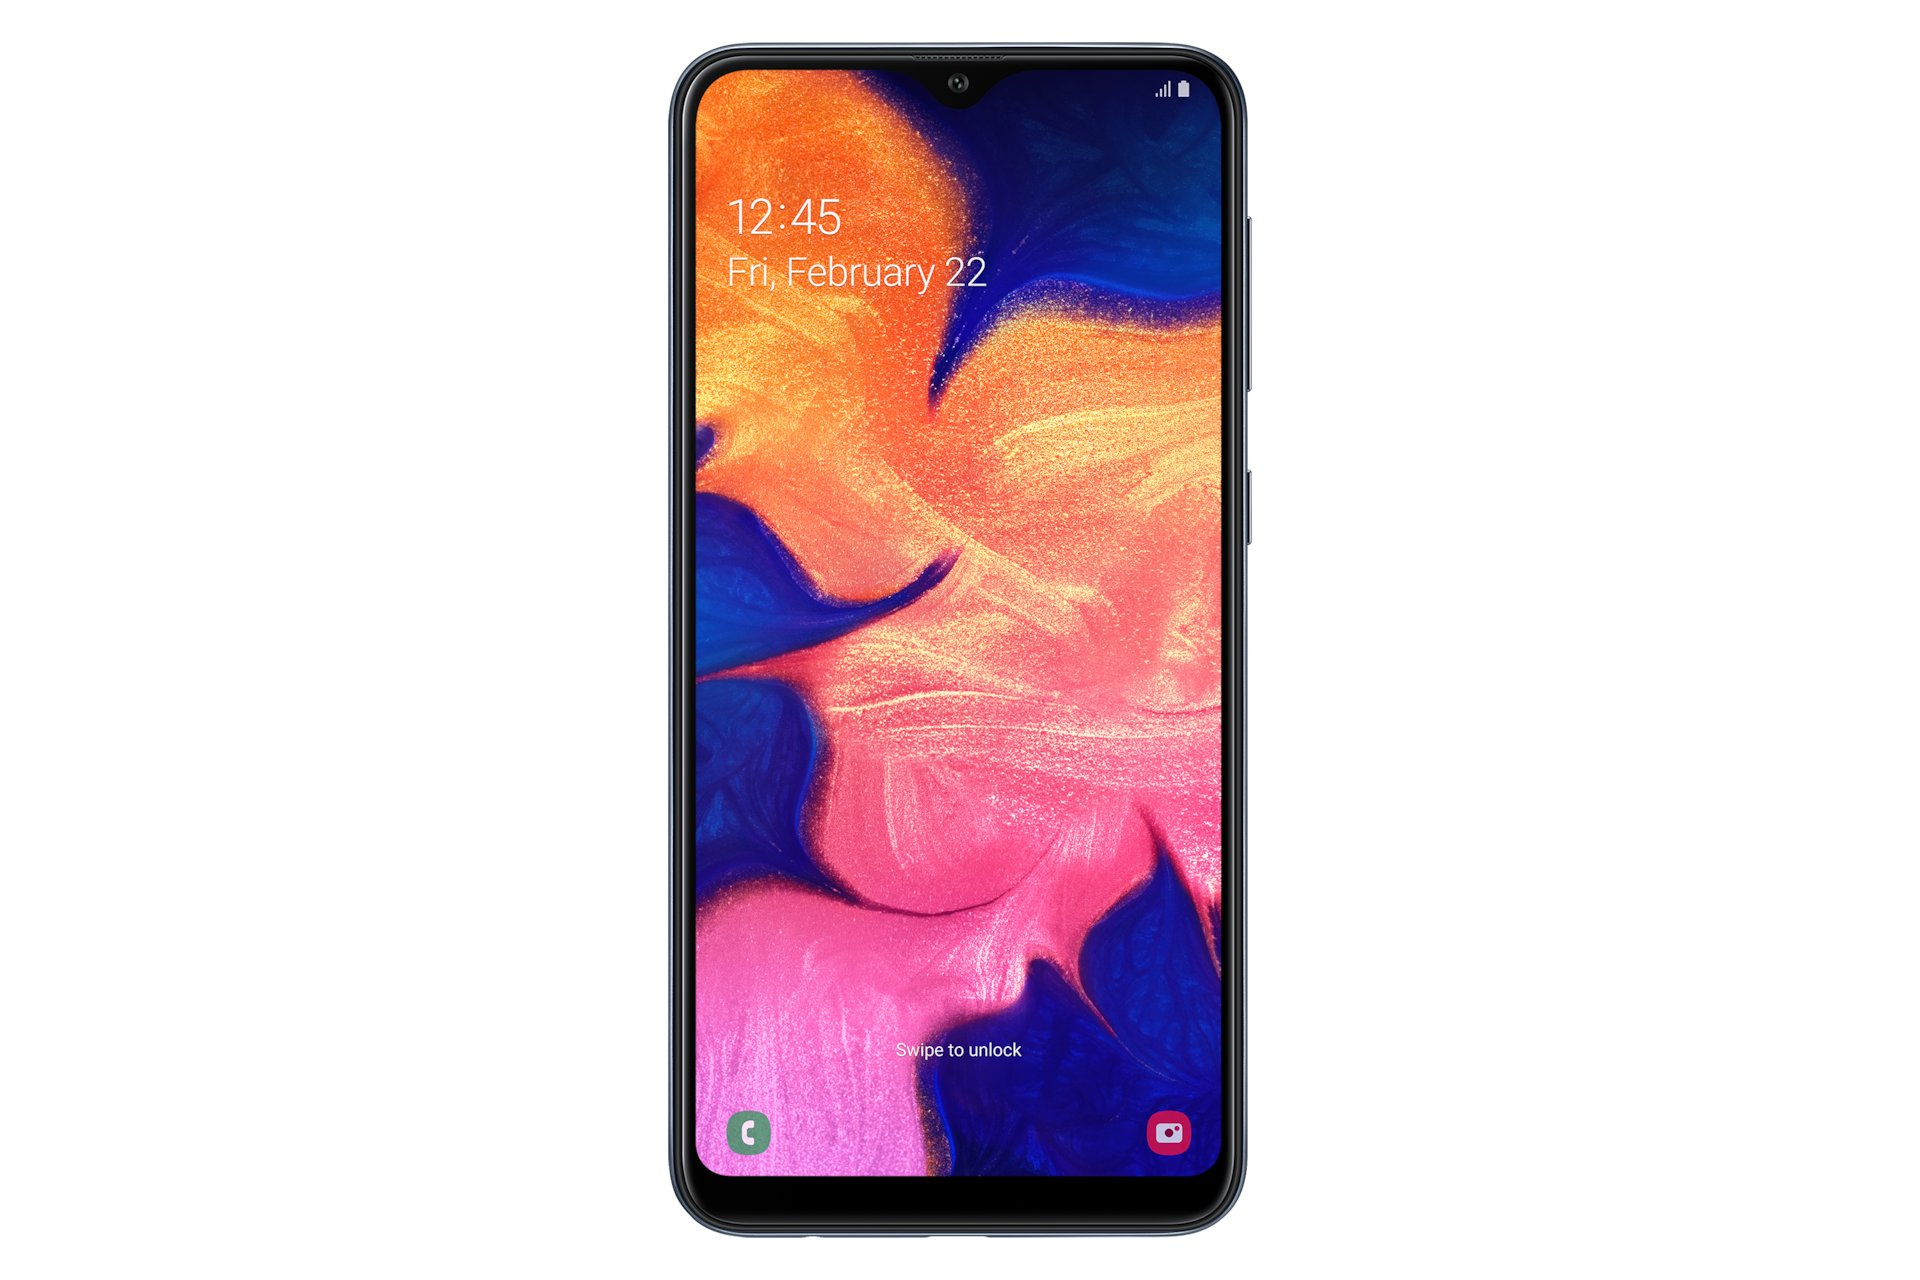 Samsung Galaxy A10 Specifications, 6.2” Infinity-V display for immersive visual experience